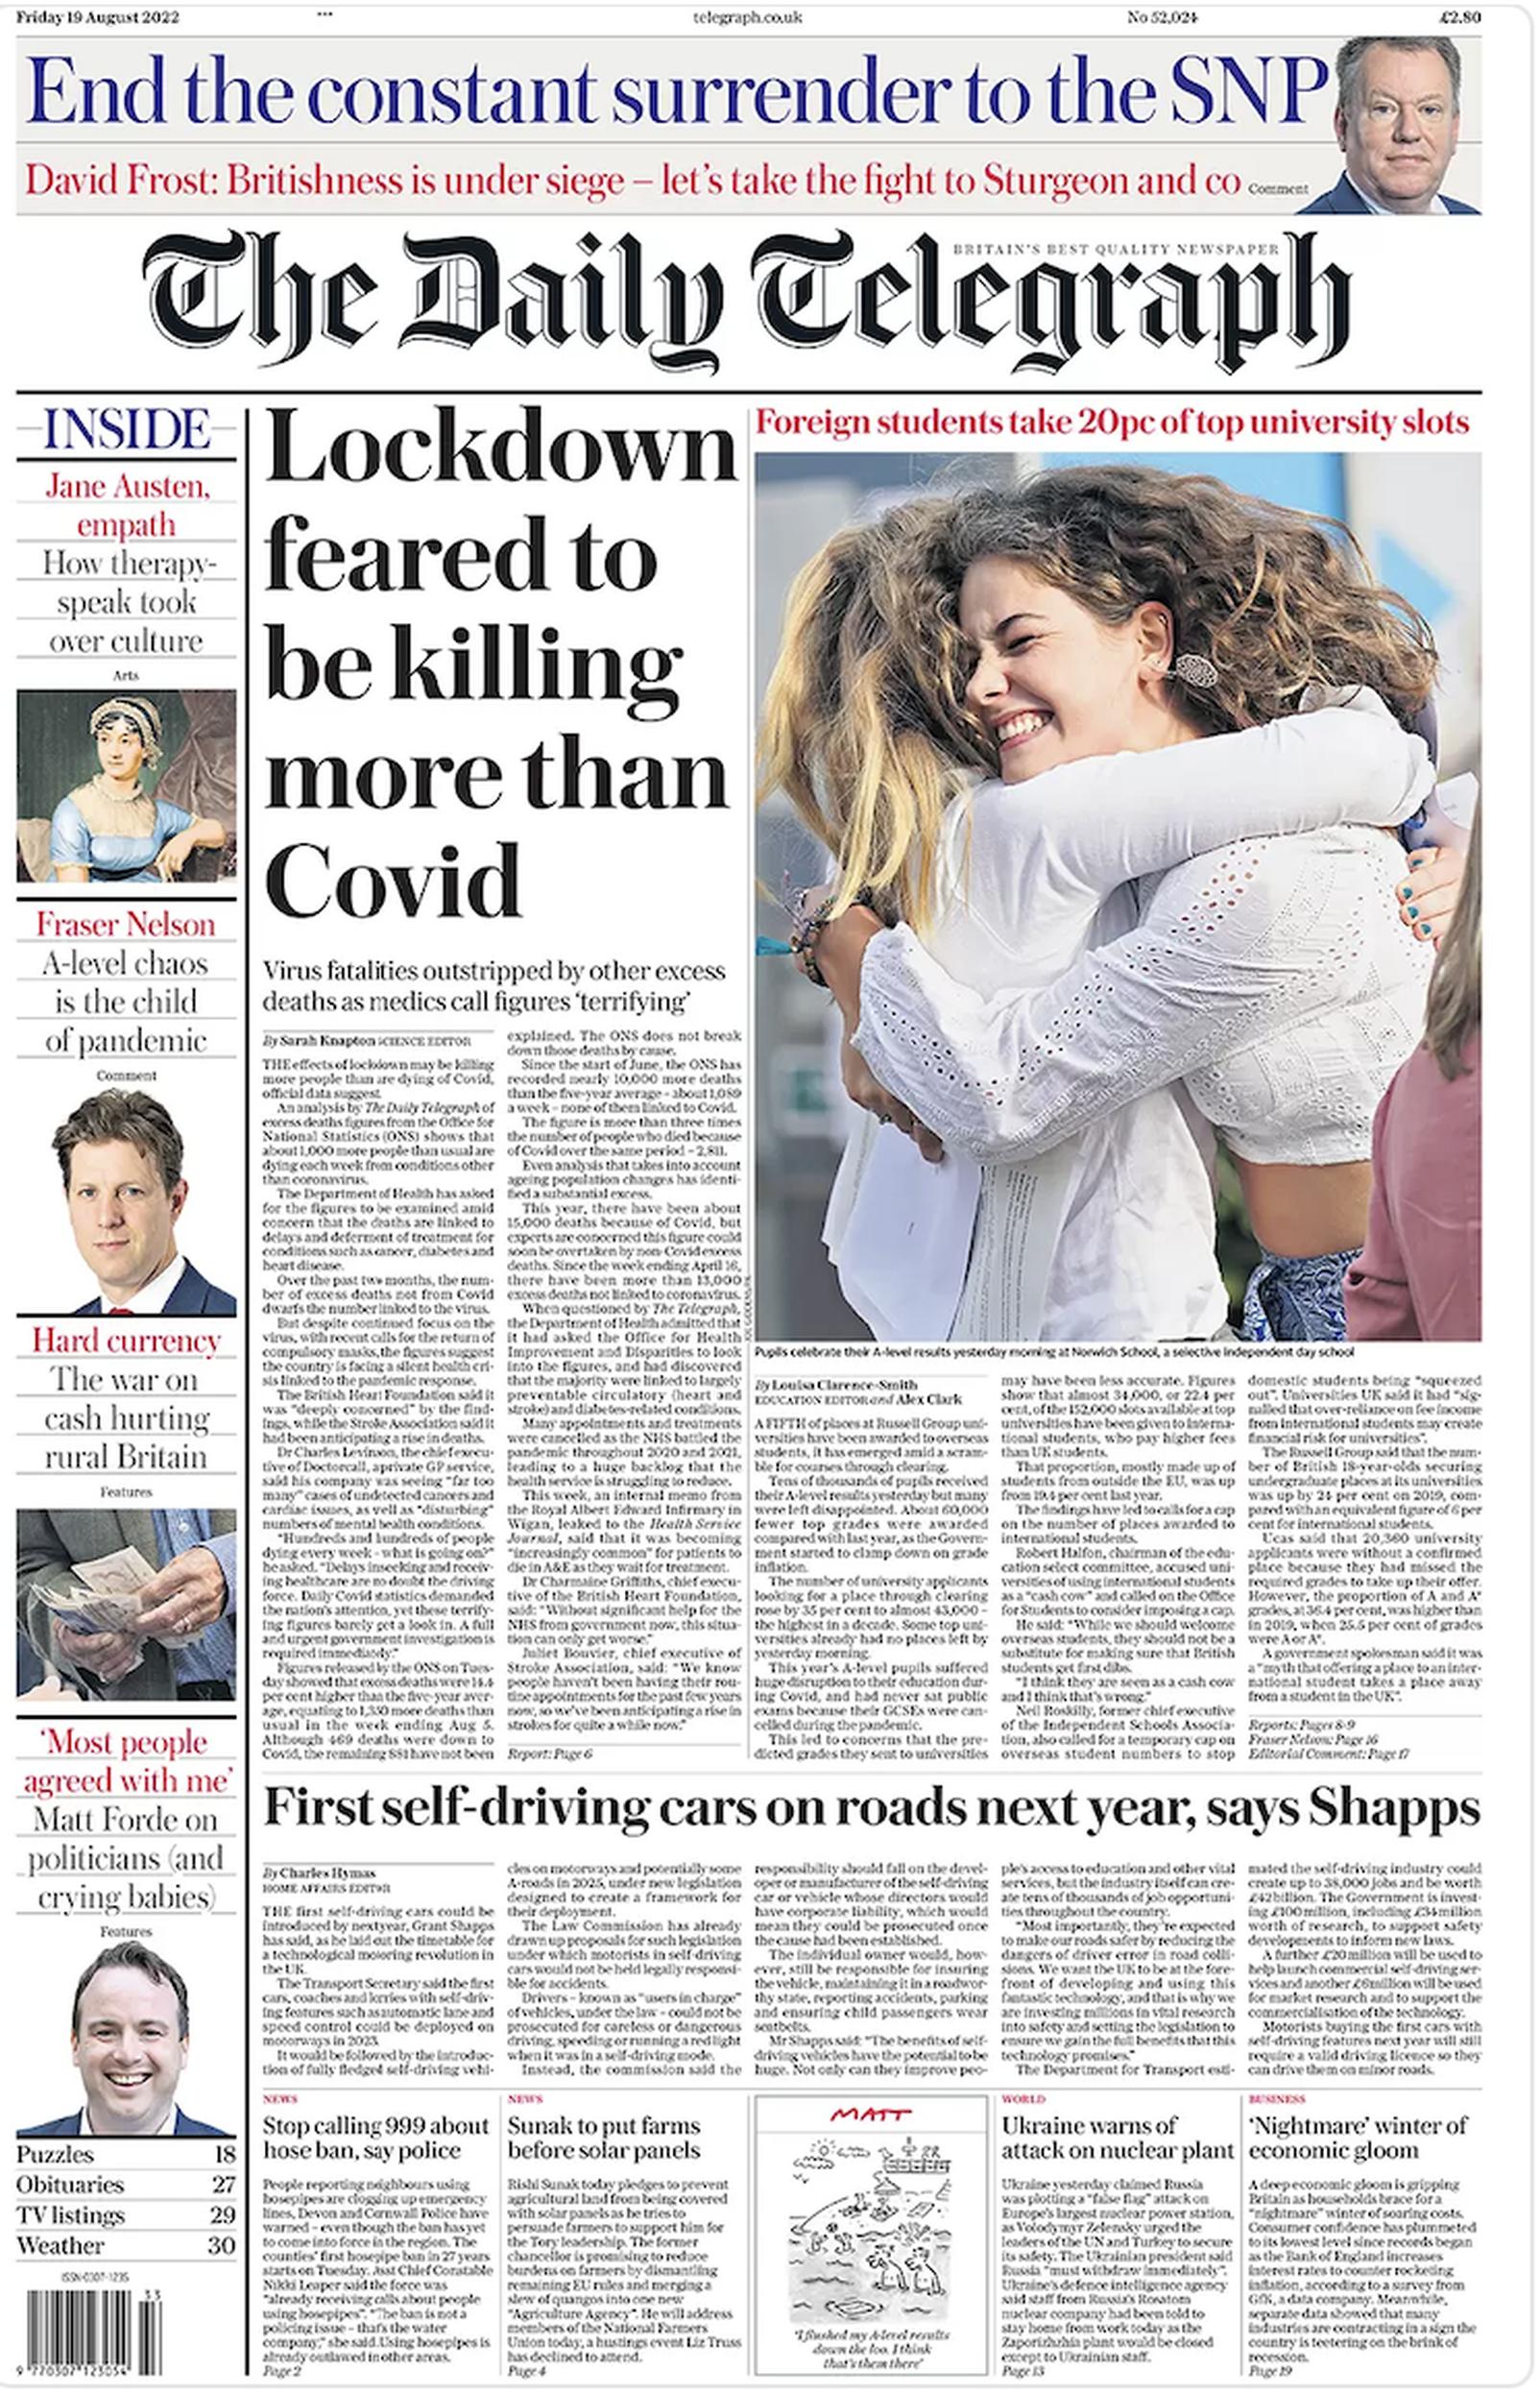 The Telegraph reported the plan on its front page